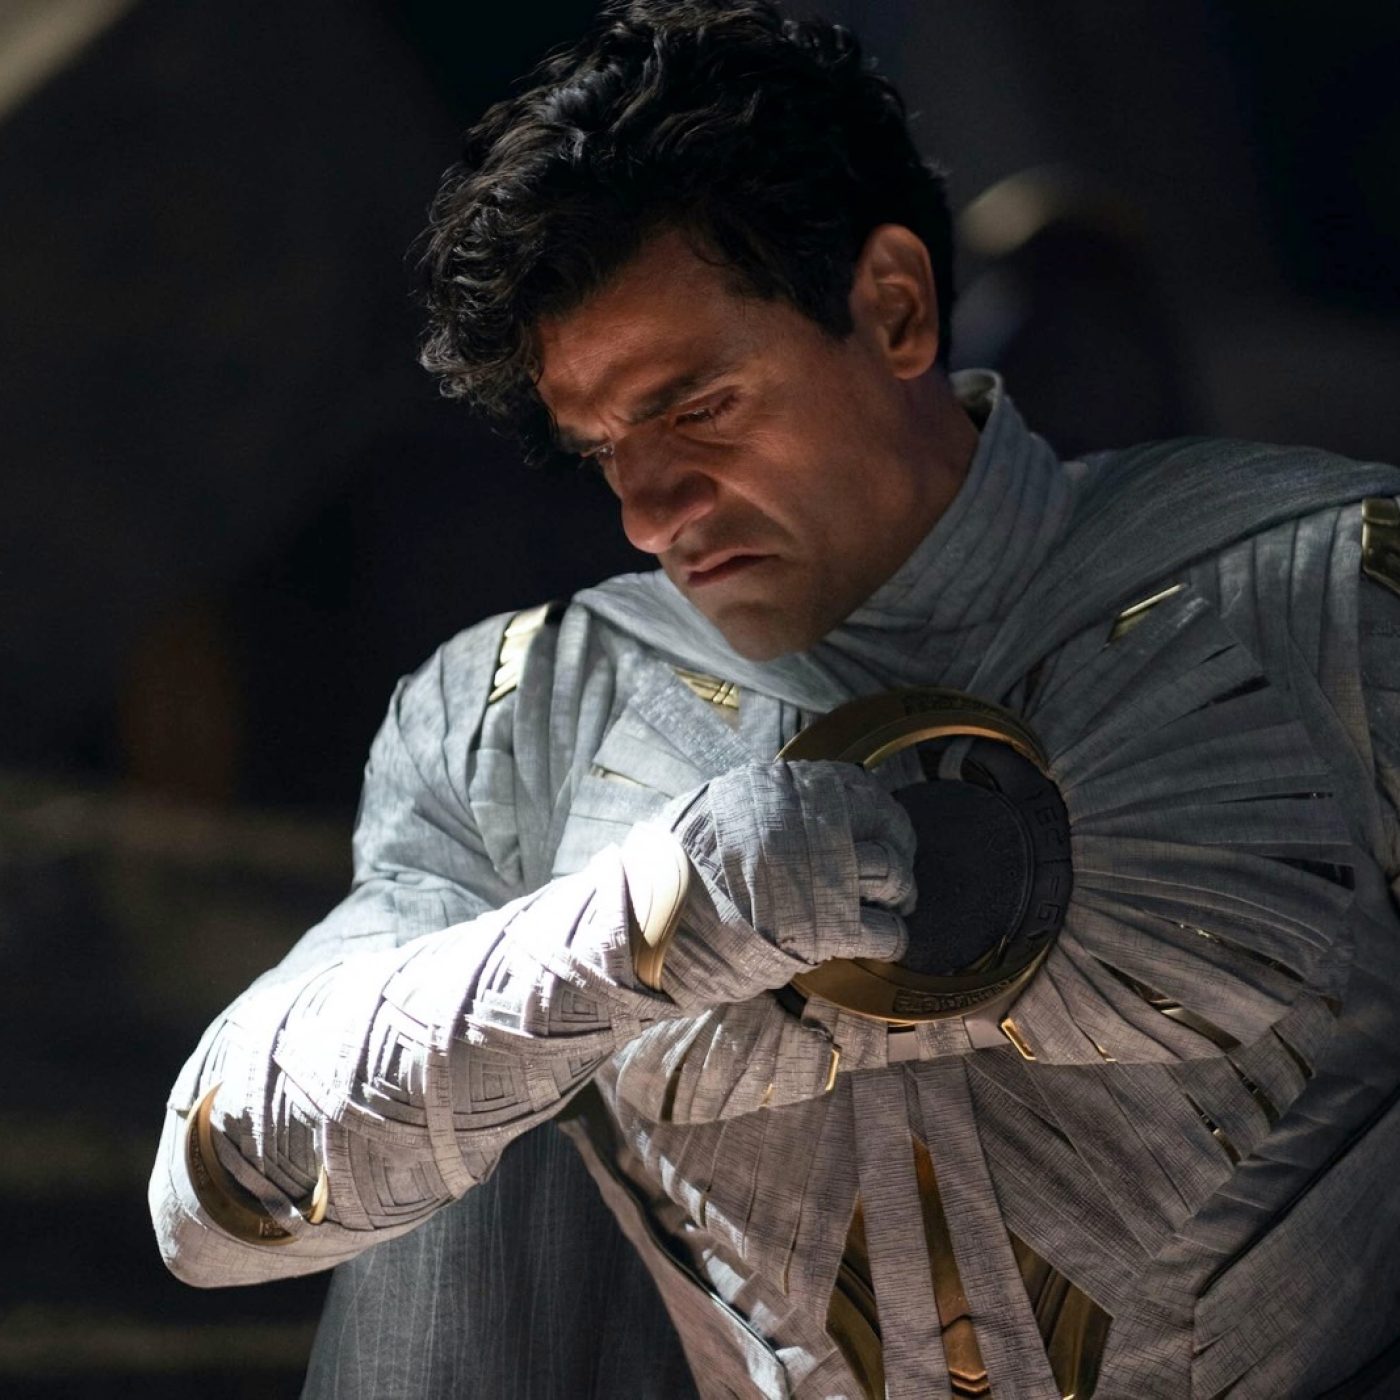 Did Oscar Isaac confirm 'Moon Knight' season 2 in a TikTok video? - Times  of India